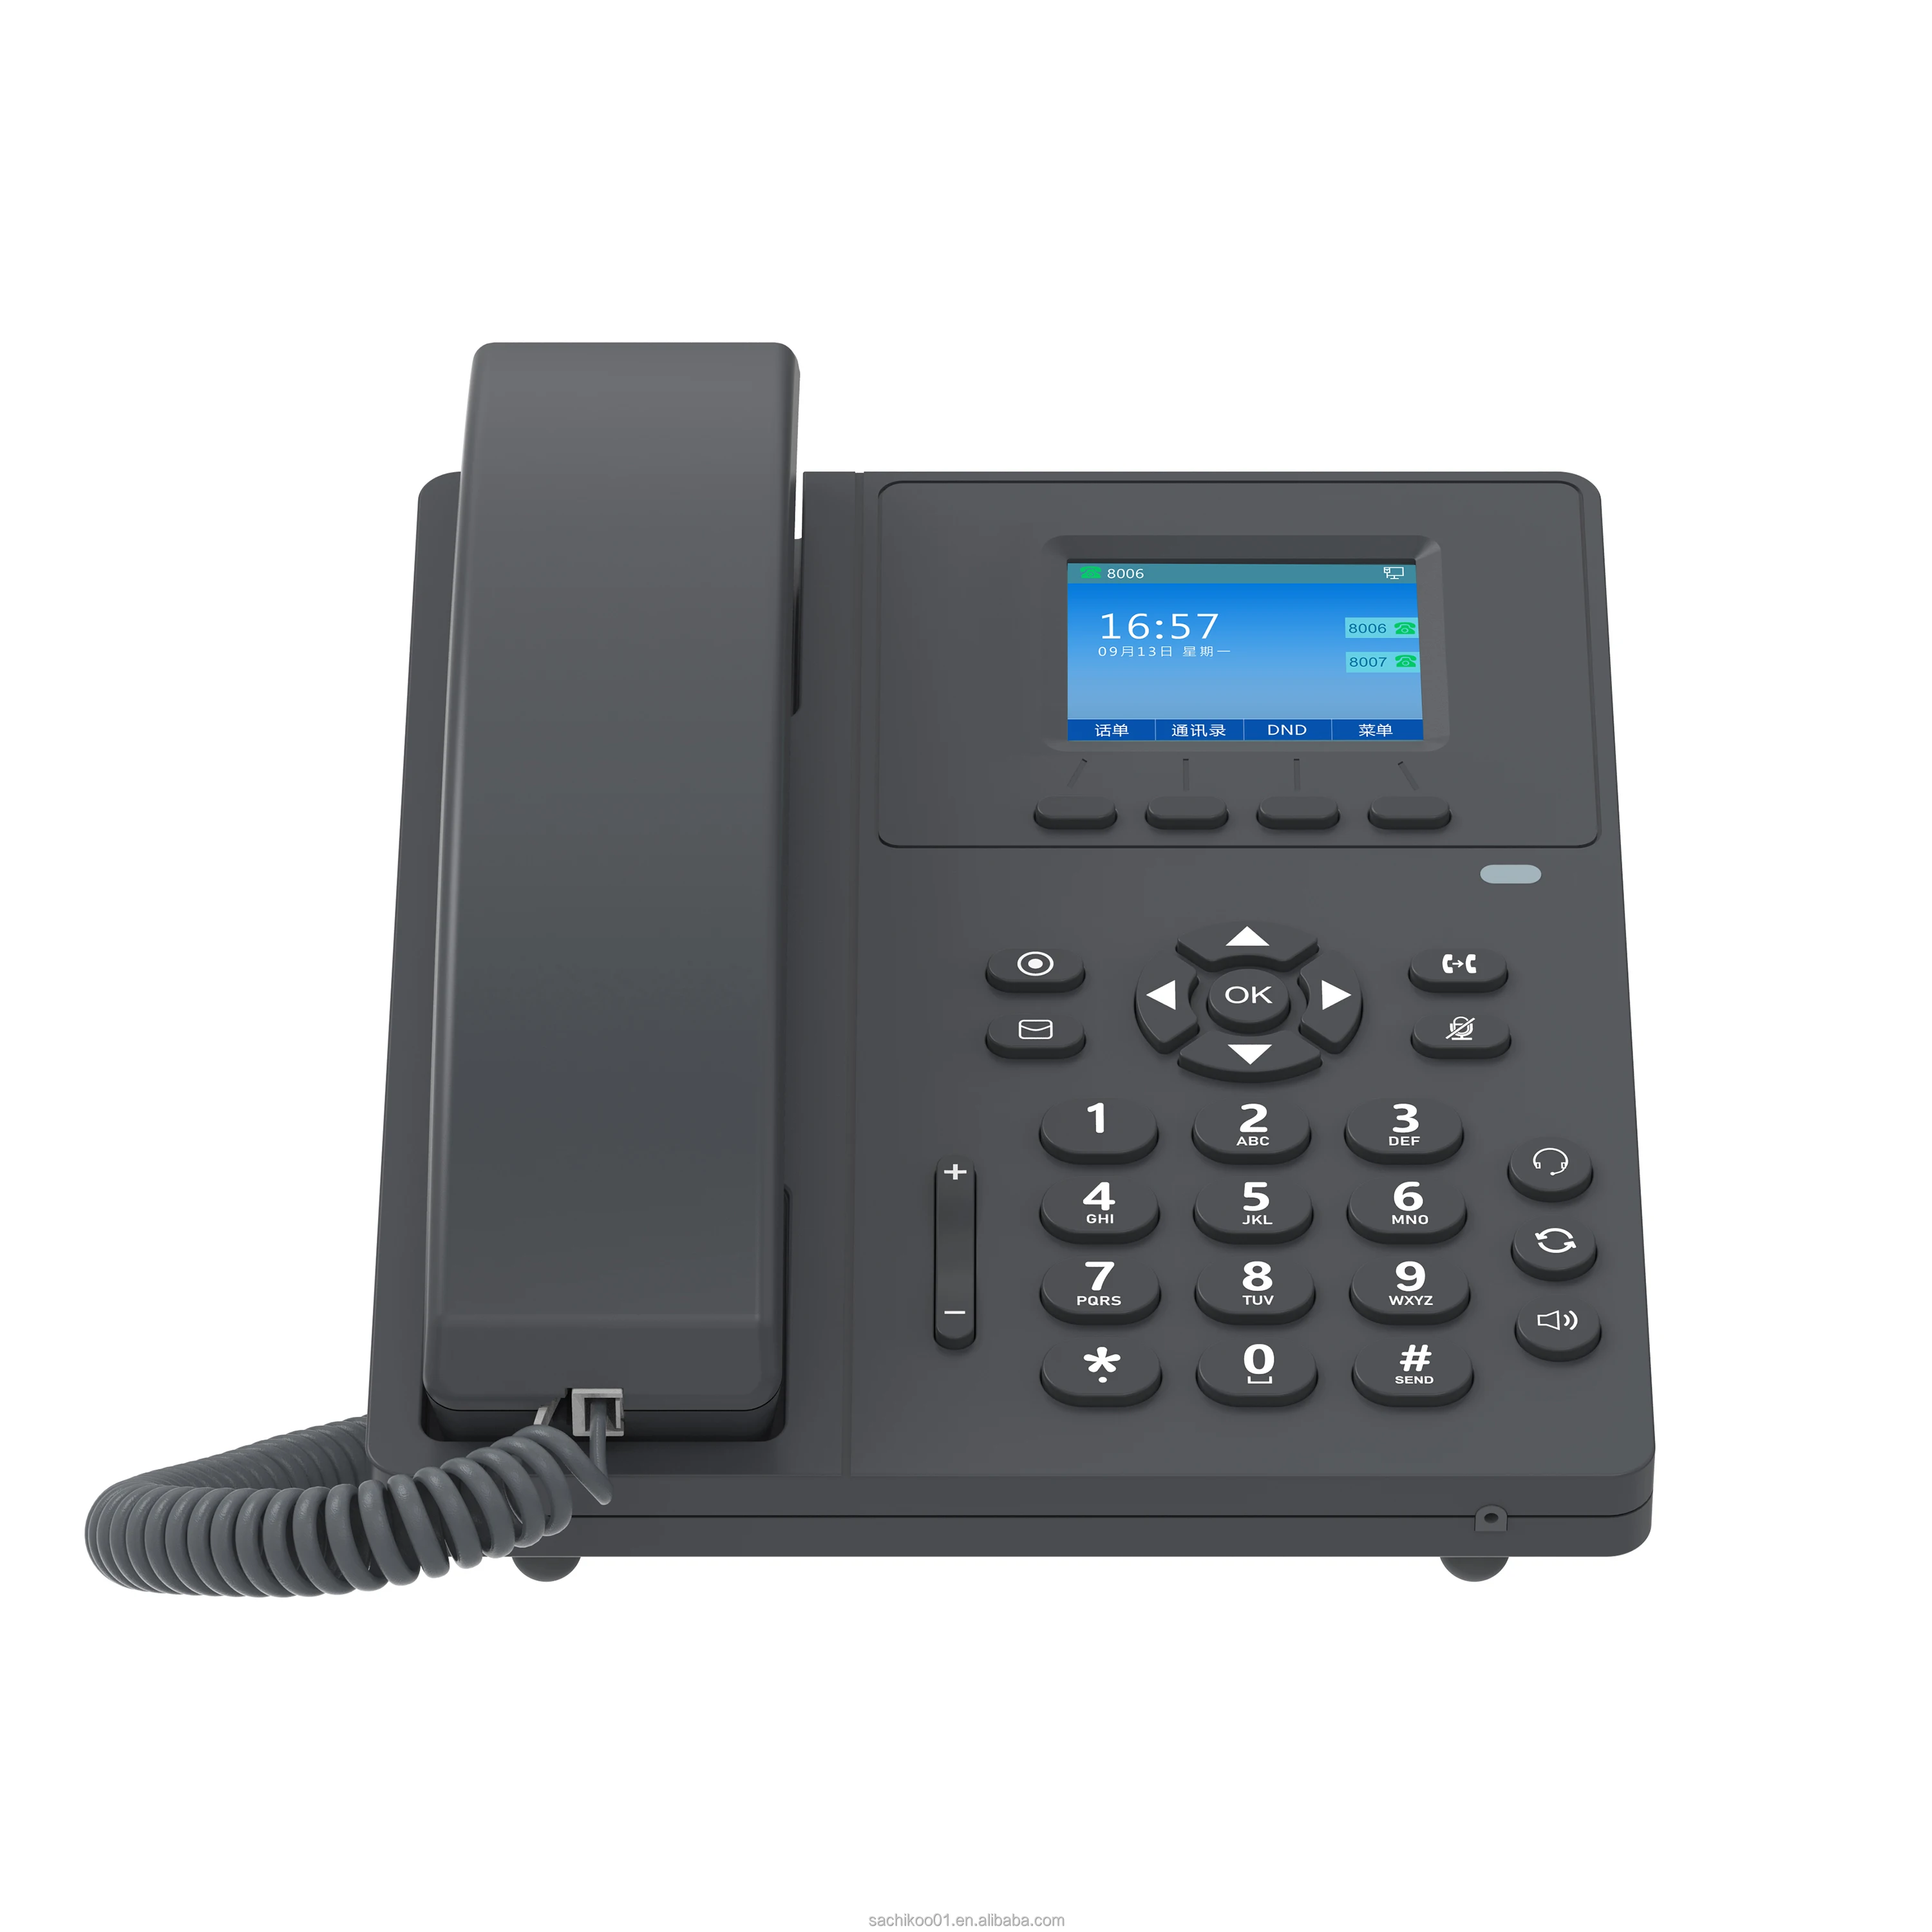 V110 IP Phone 2.4 inch Color Backlit Color Screen Support HD Handset/Speaker VoIP Phone with POE Power Adapter